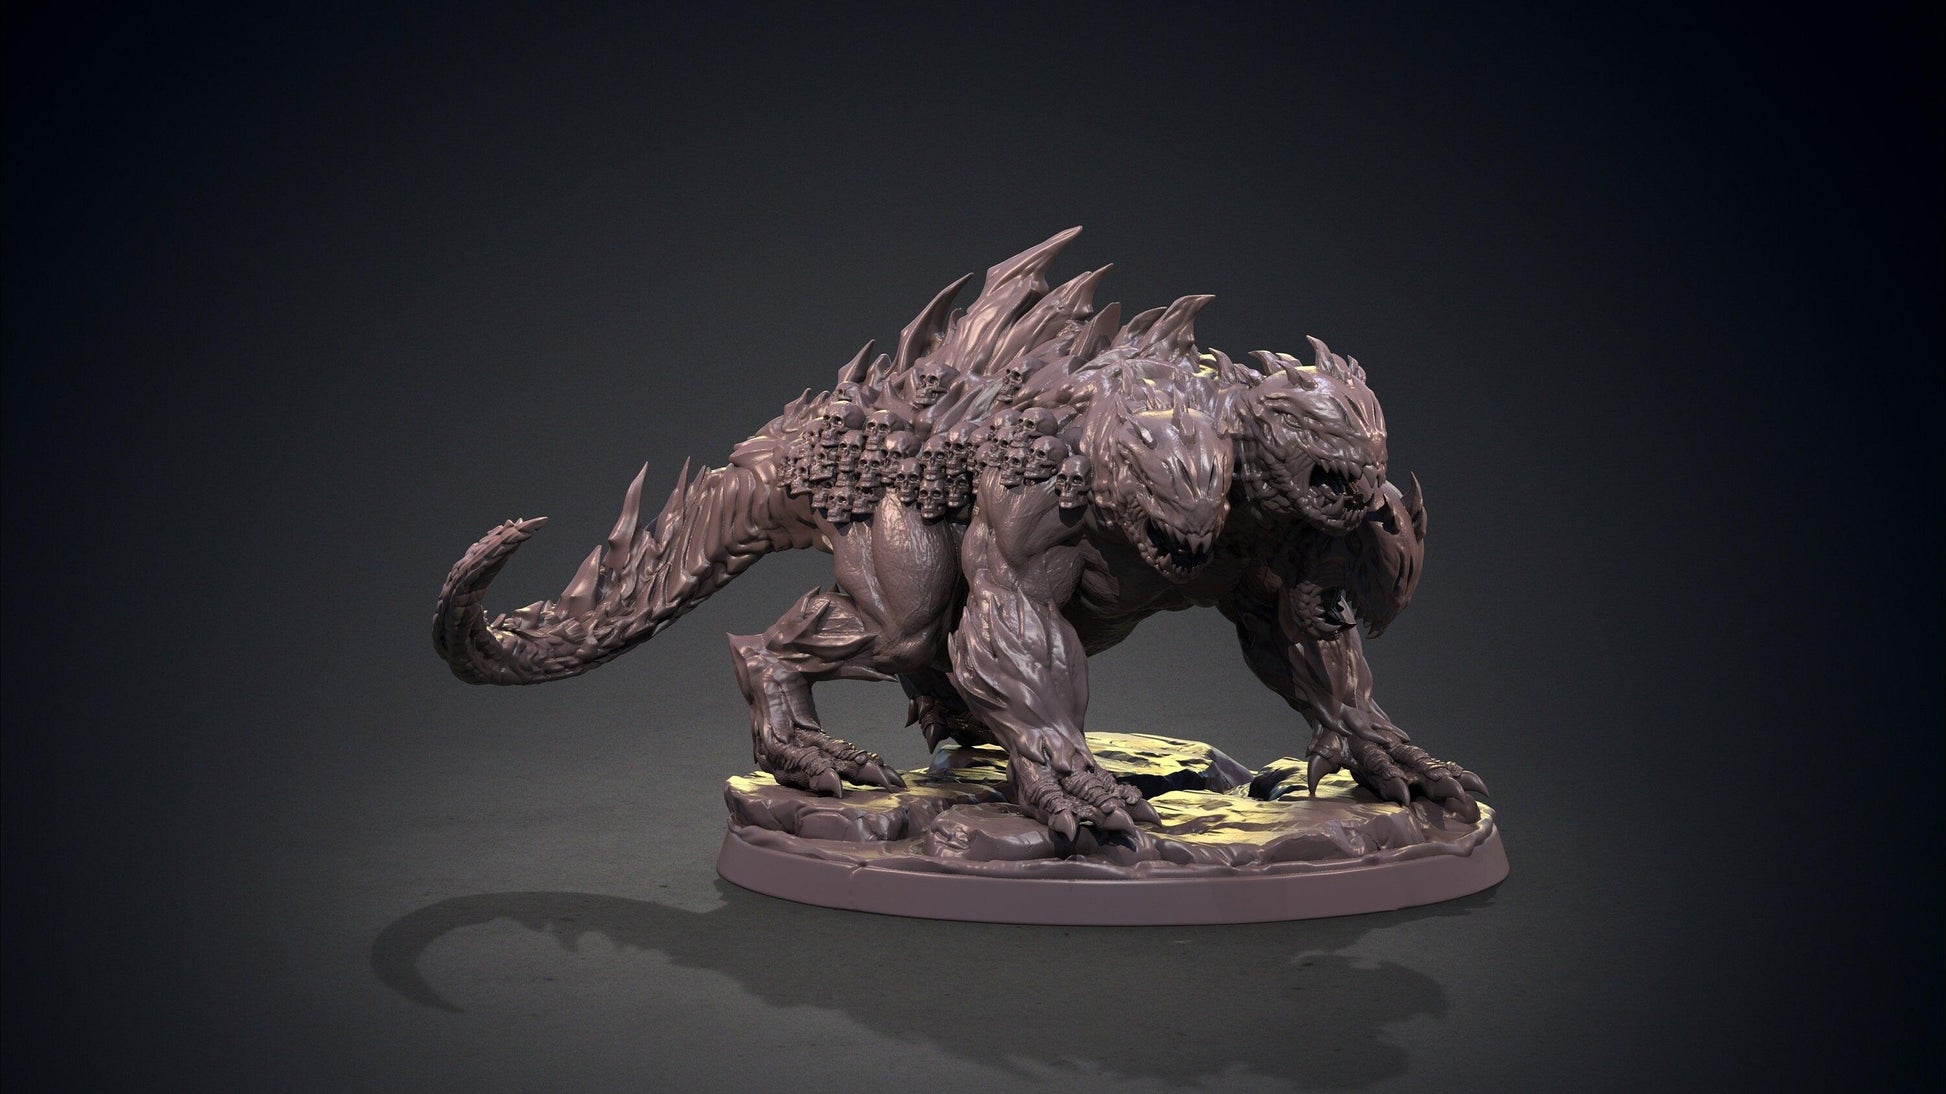 Cerberus Demon Miniature | Clay Cyanide | Dante's Inferno | Tabletop Gaming | DnD Miniature | Dungeons and Dragons dnd 5e - Plague Miniatures shop for DnD Miniatures